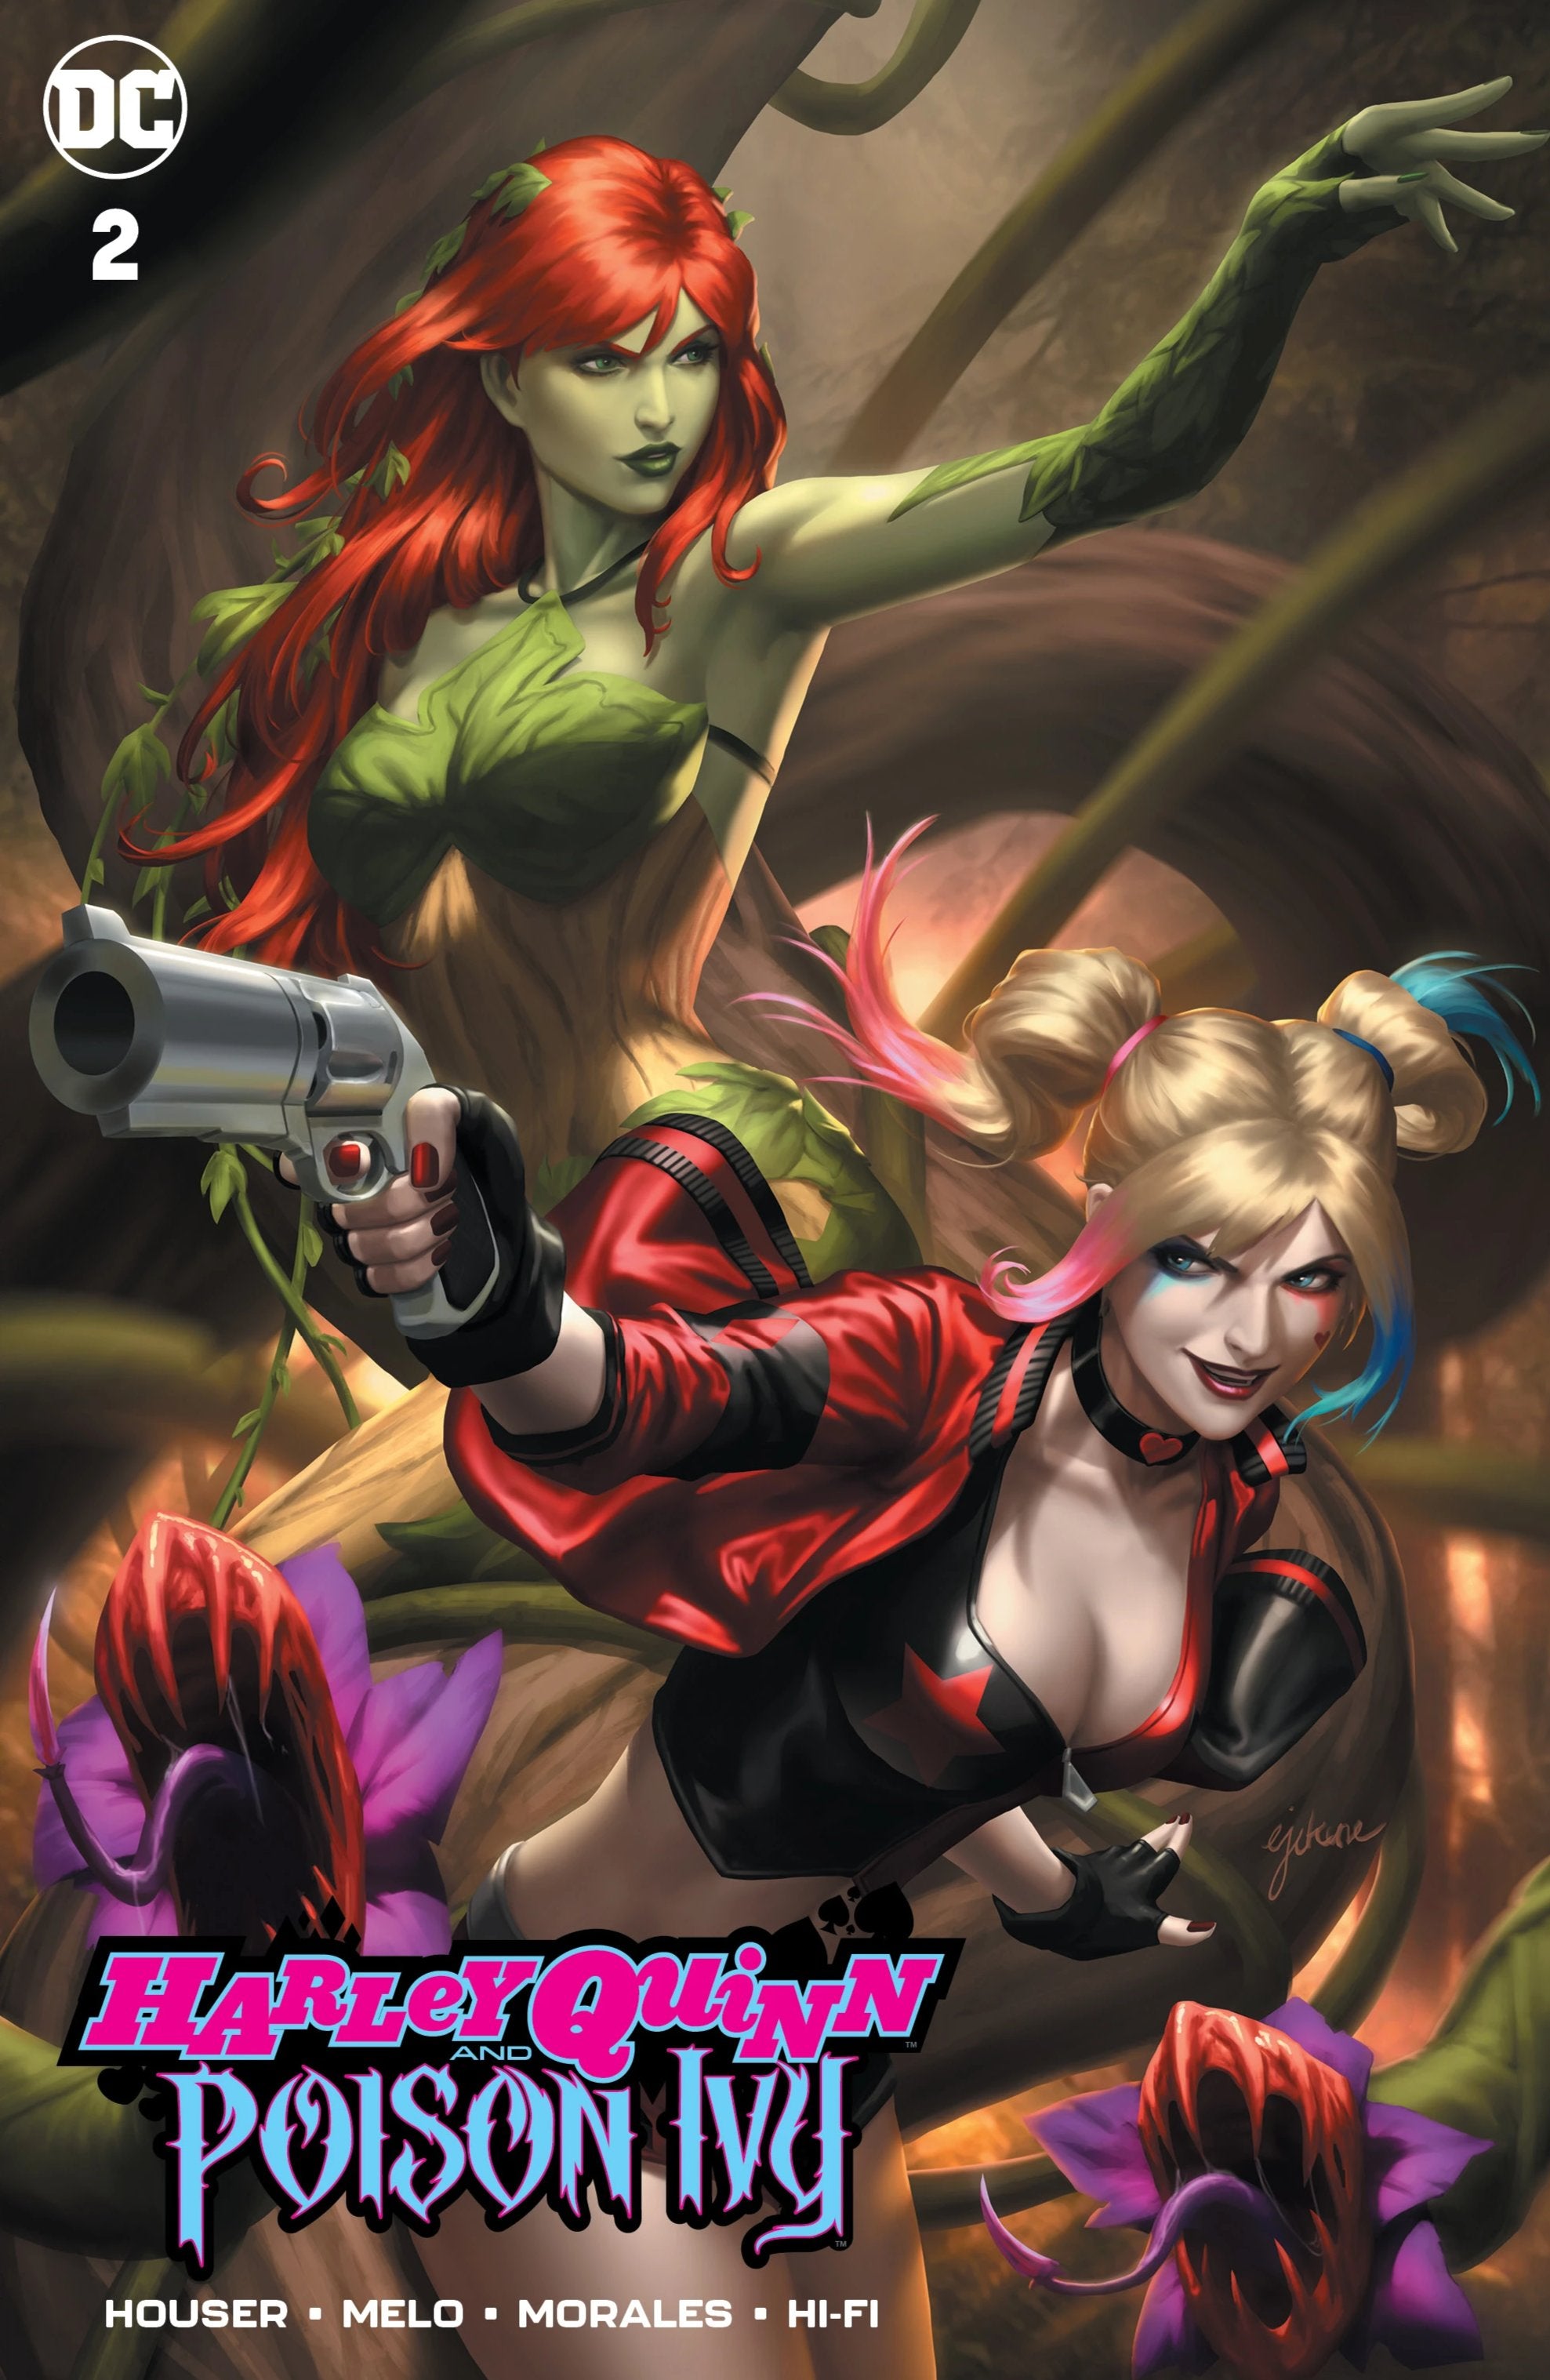 HARLEY QUINN & POISON IVY #3 (OF 6) UNKNOWN COMICS EJIKURE (11/13/2019)